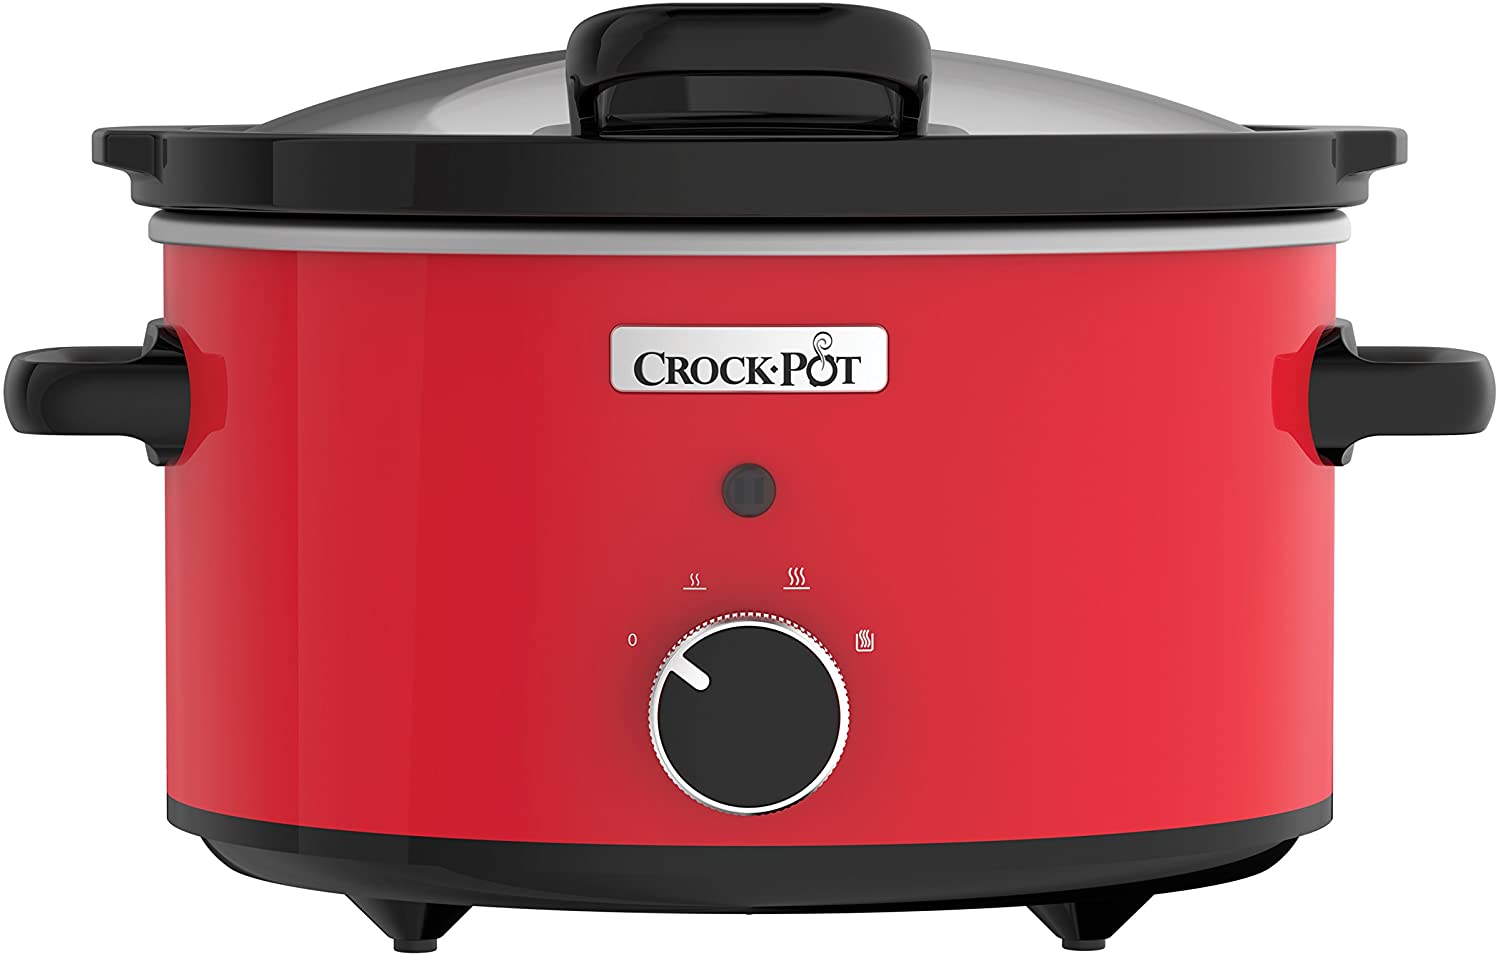 https://www.220stores.com/Shared/Images/Product/Crock-Pot-CSC037-Slow-Cooker-Hinged-Lid-3-5-Liter-3-4-People-Red-220-240-Volt-For-Export/CSC037.jpg